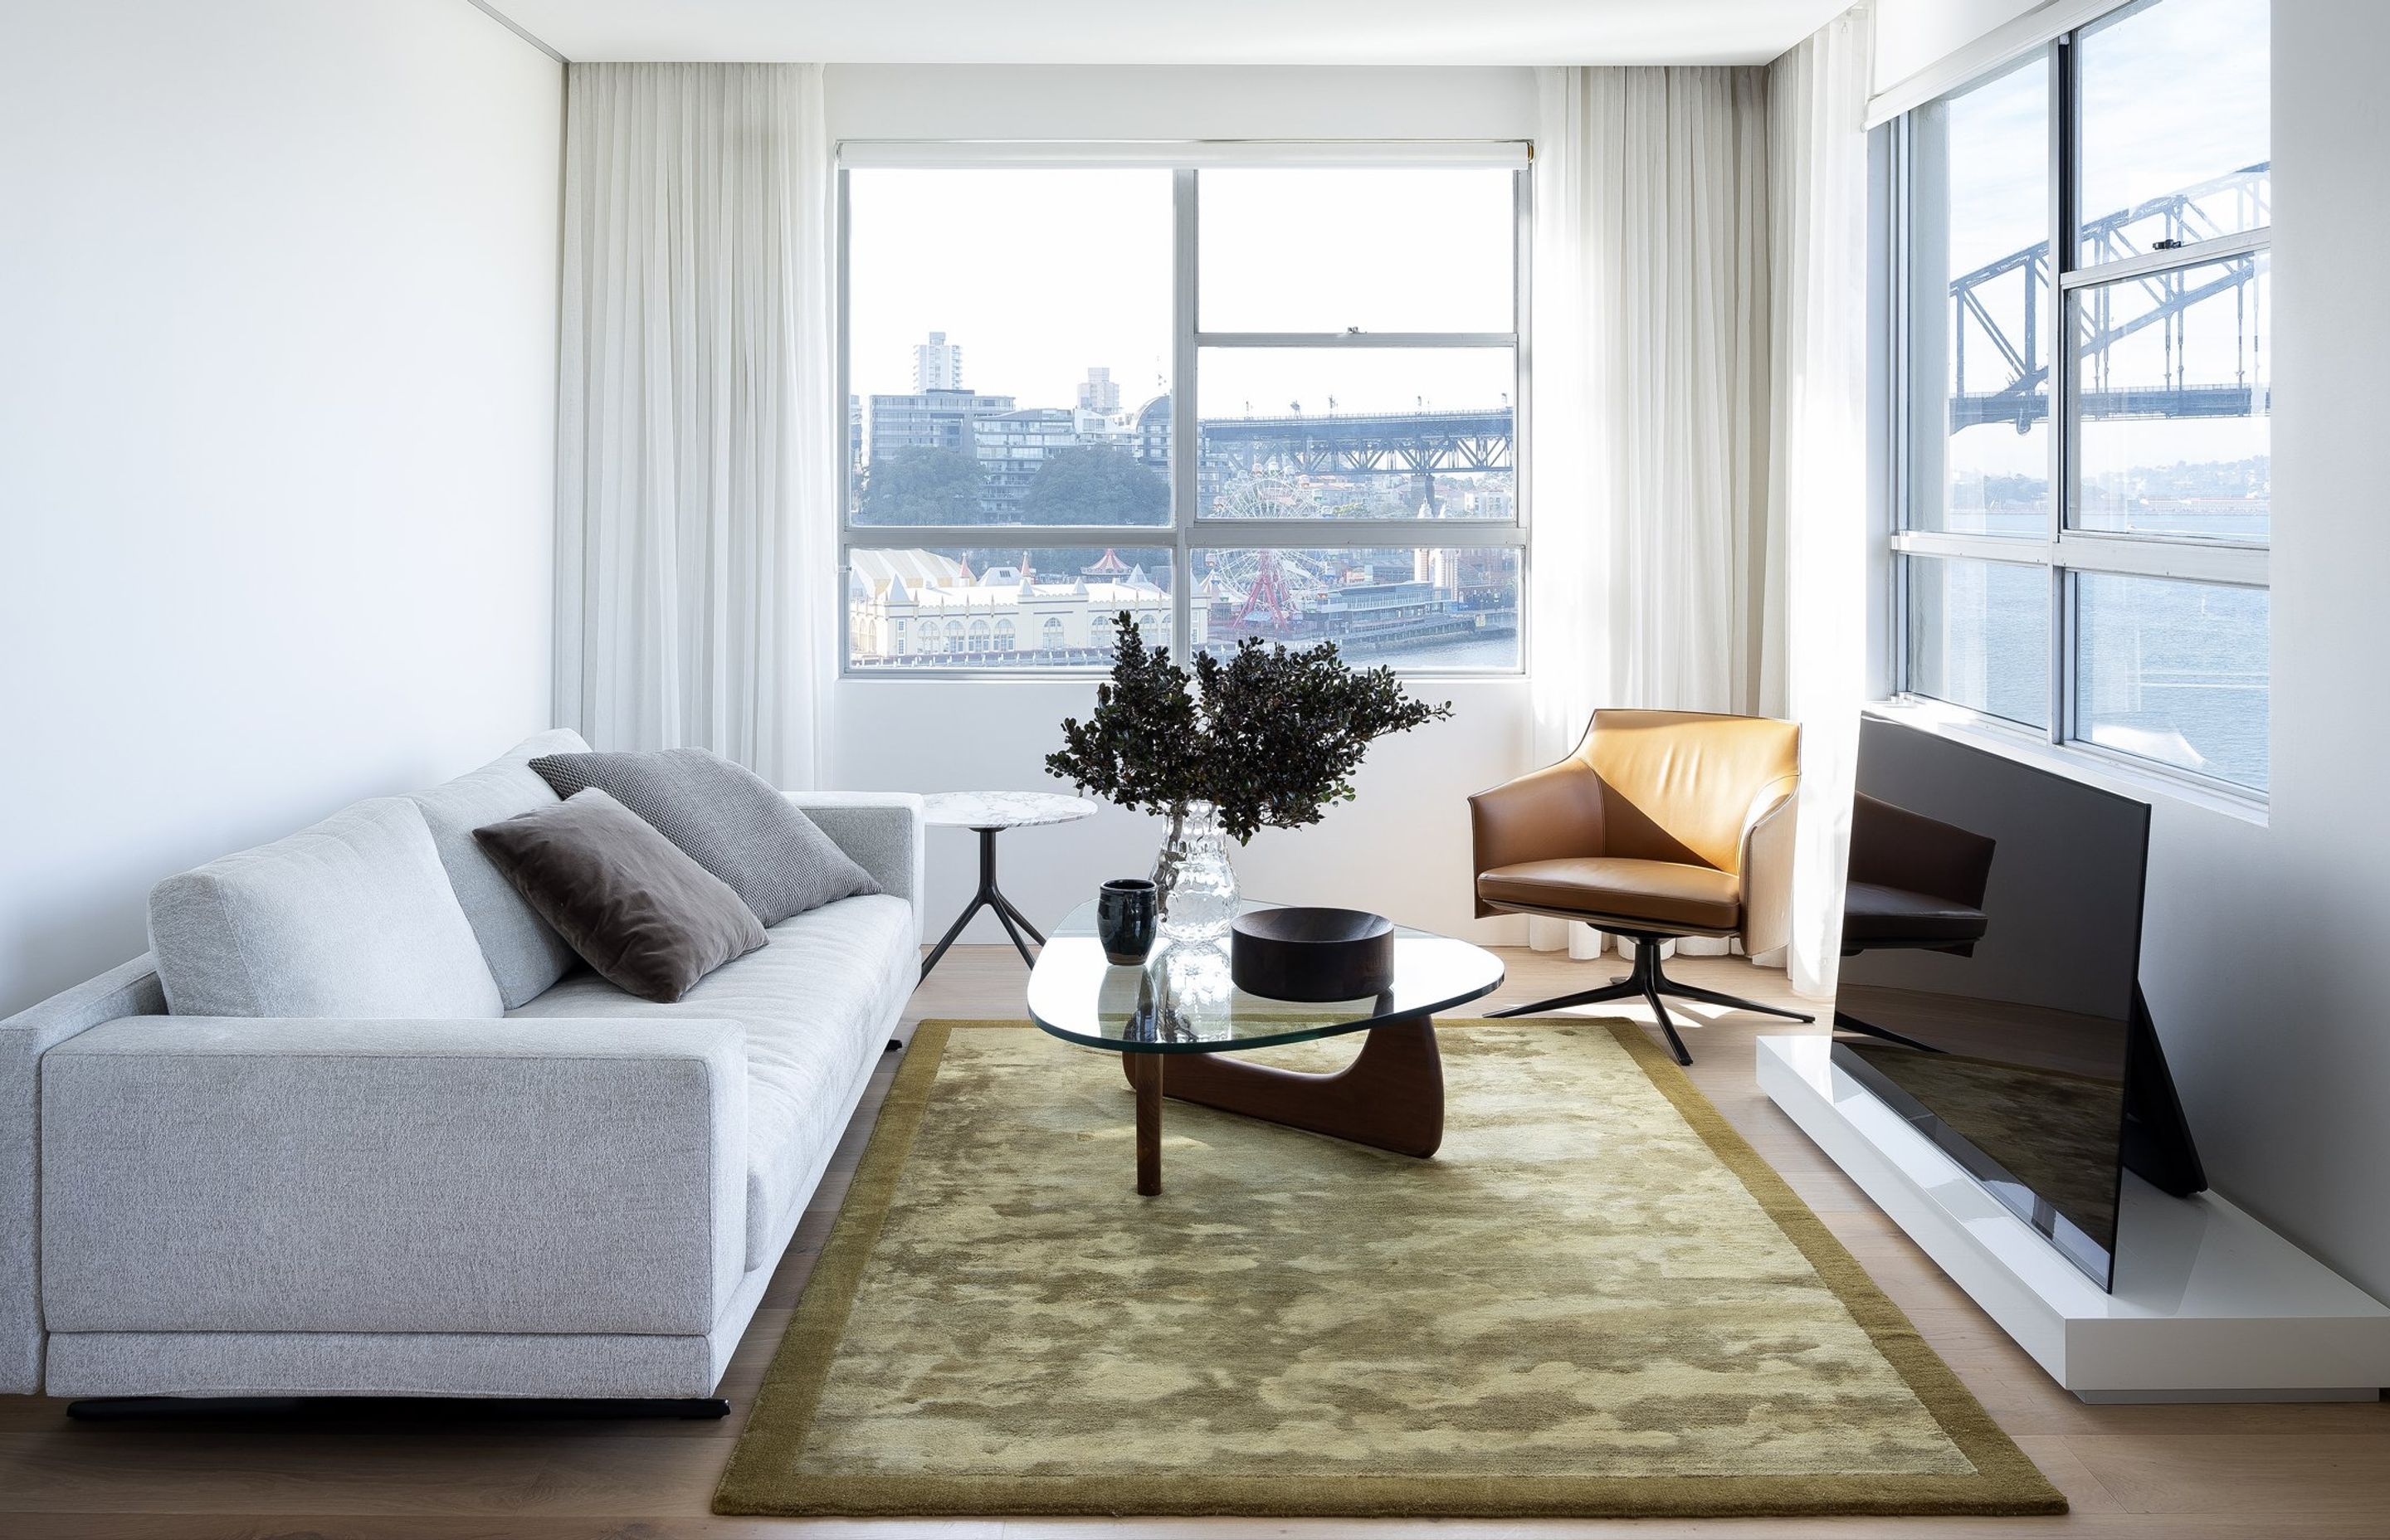 Poliform's Mondrian sofa and Stanford armchair all feature in the McMahons Point apartment along with the Poliform Frame rug in olive green bamboo and silk.